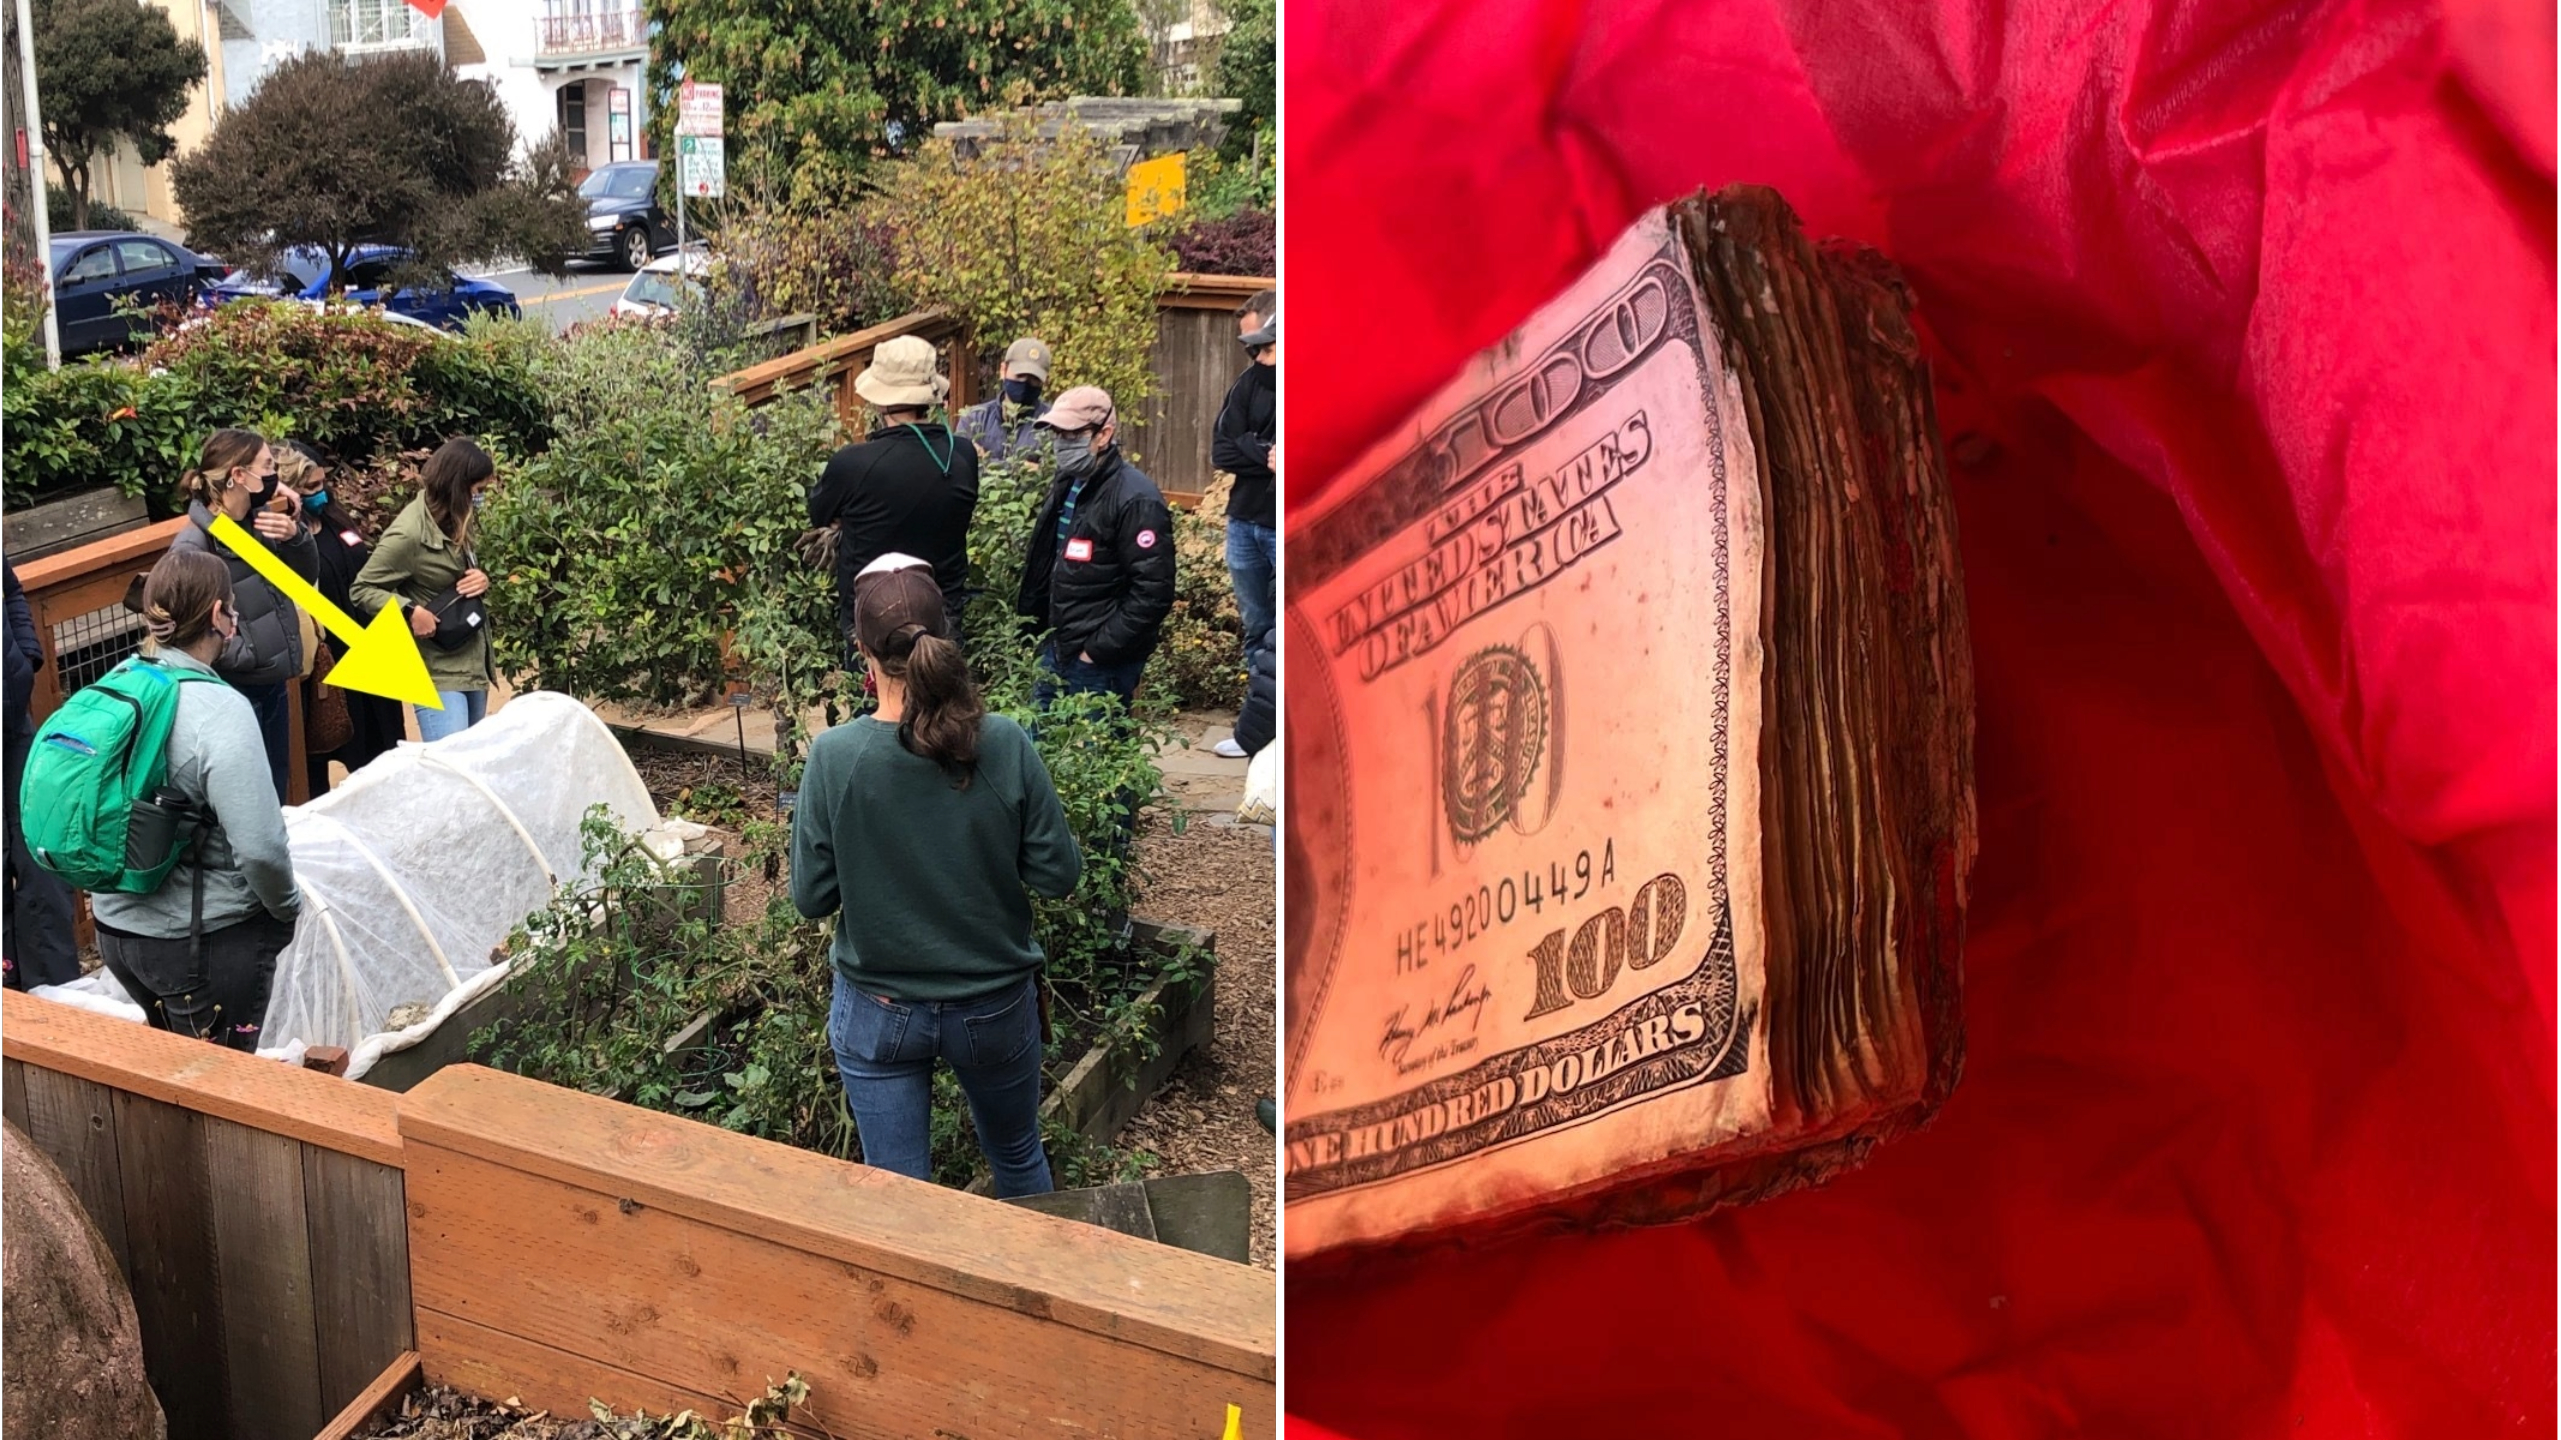 Group gardening in an urban setting, and a stack of aged $100 bills on a red background.